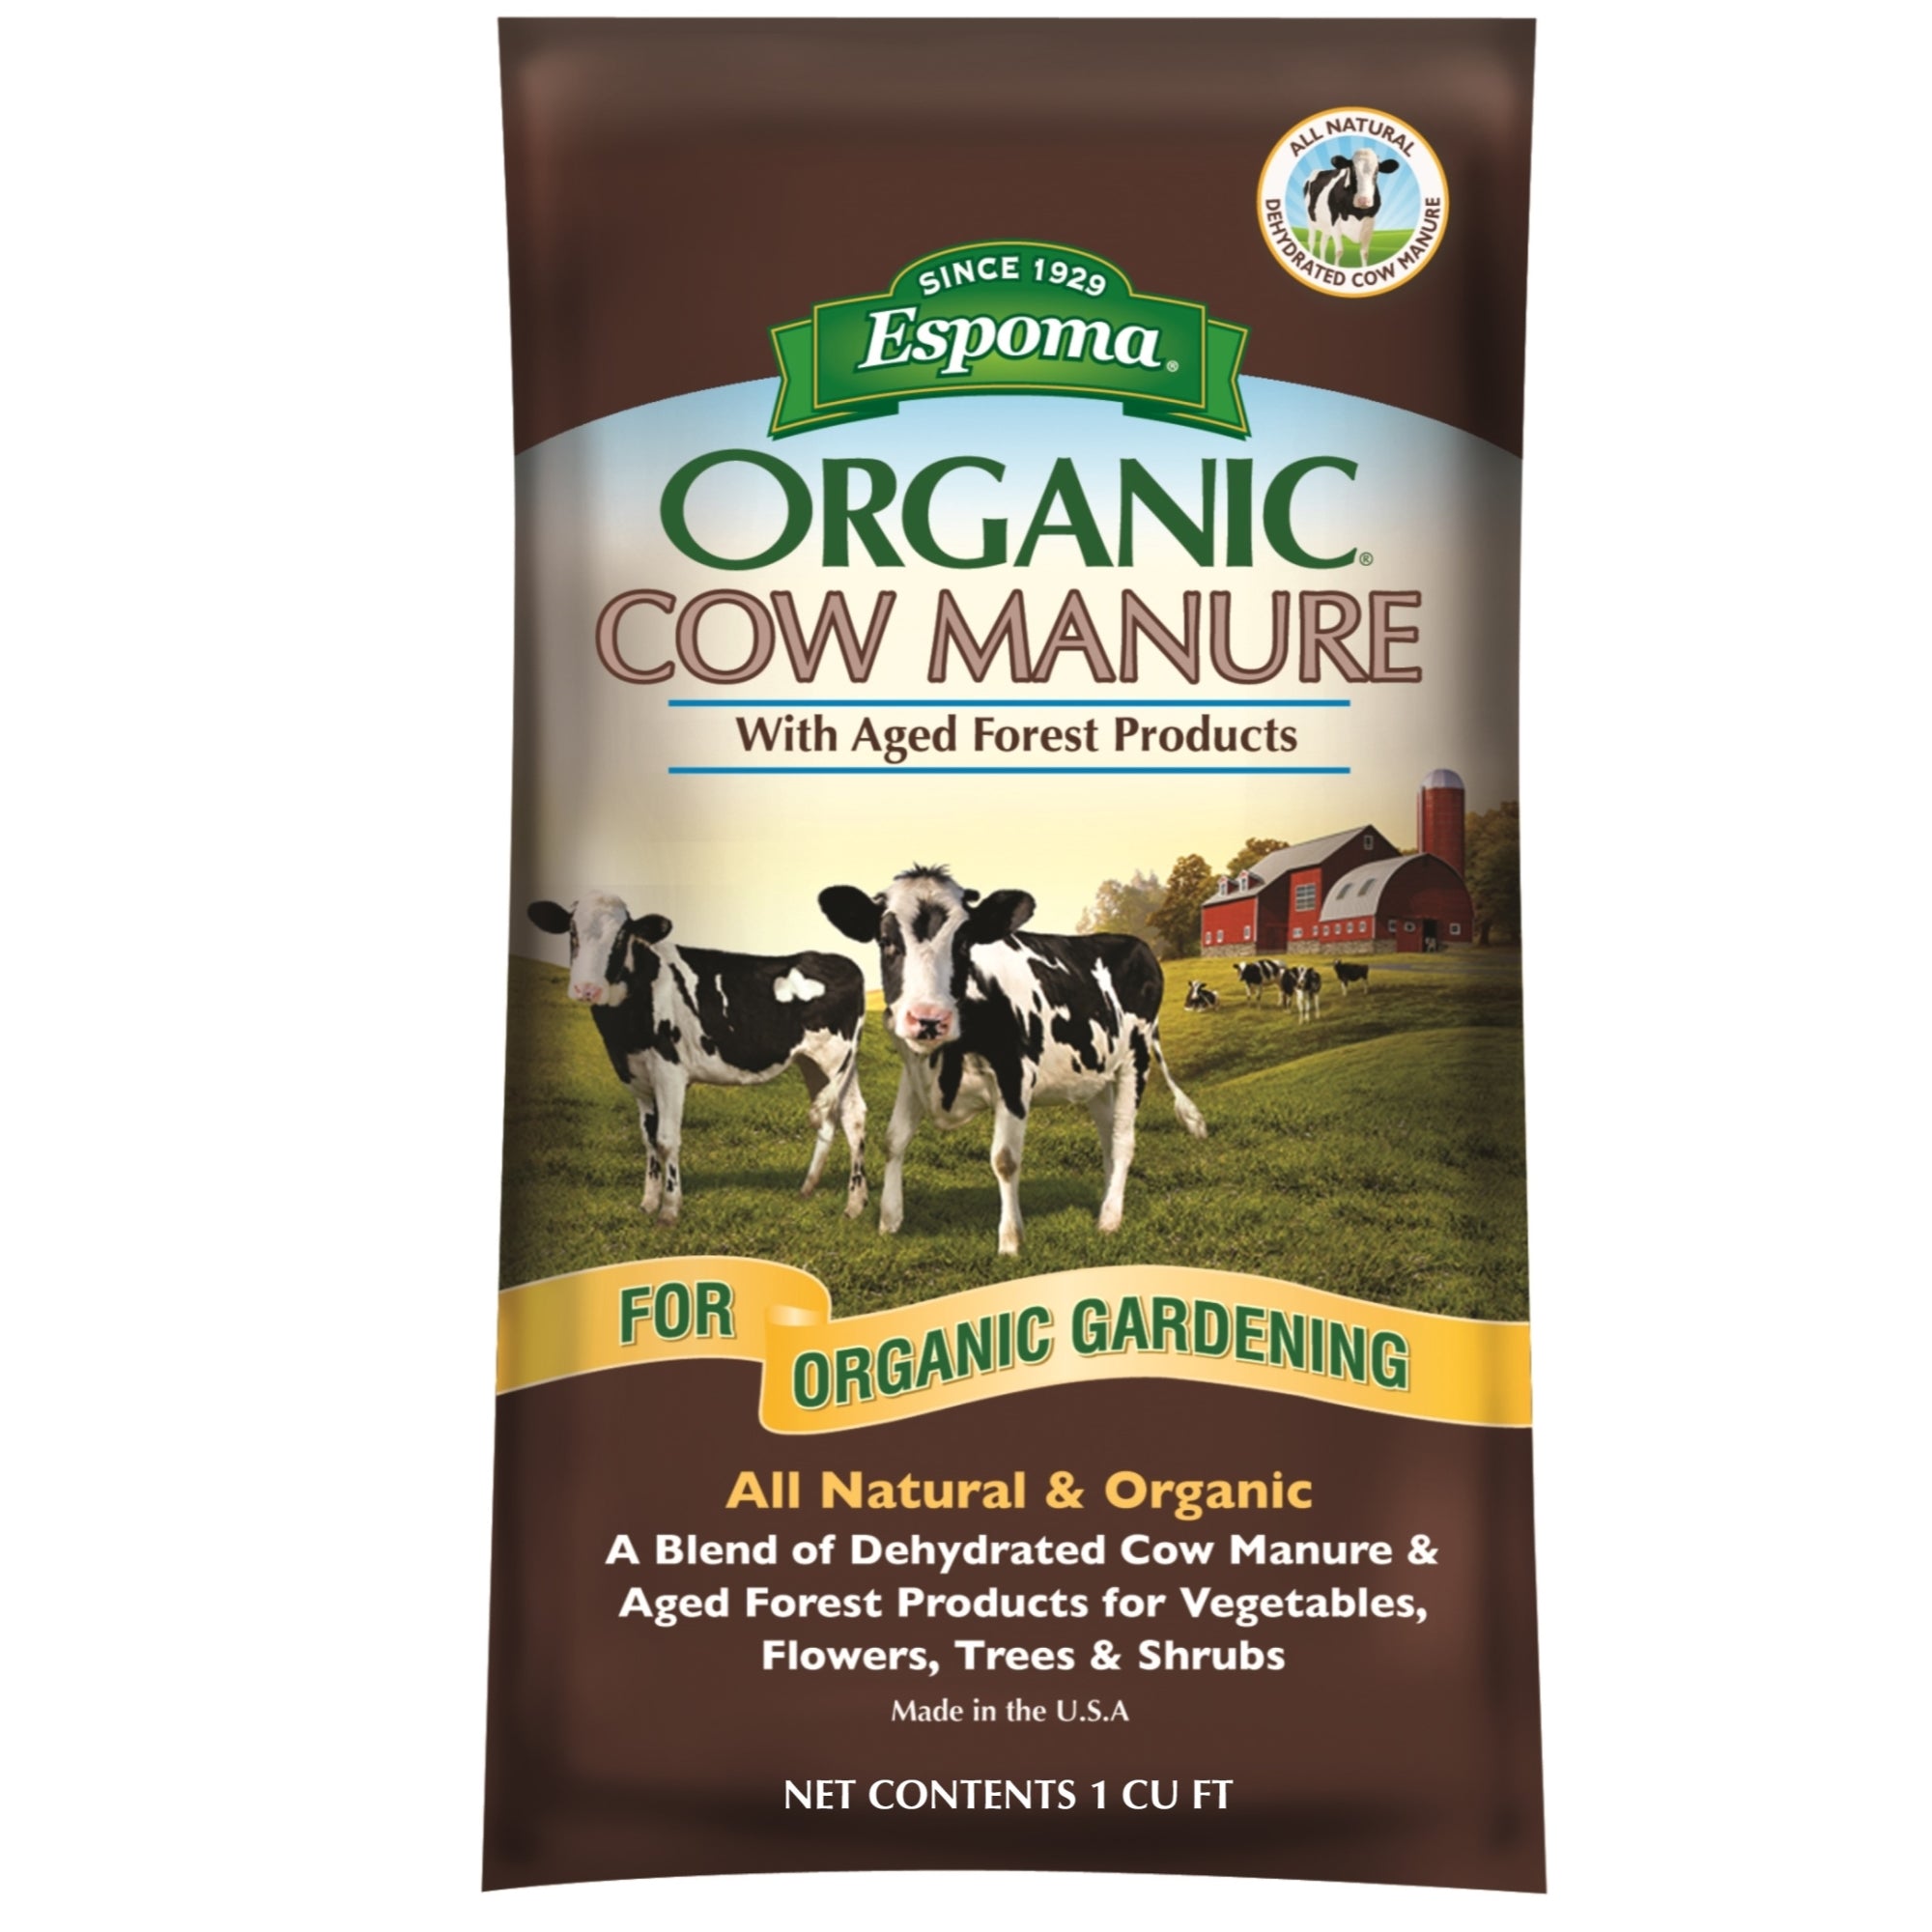 Espoma Organic Cow Manure with Aged Forest Products, All-Natural and Organic for Organic Gardening, 1 CF Bag